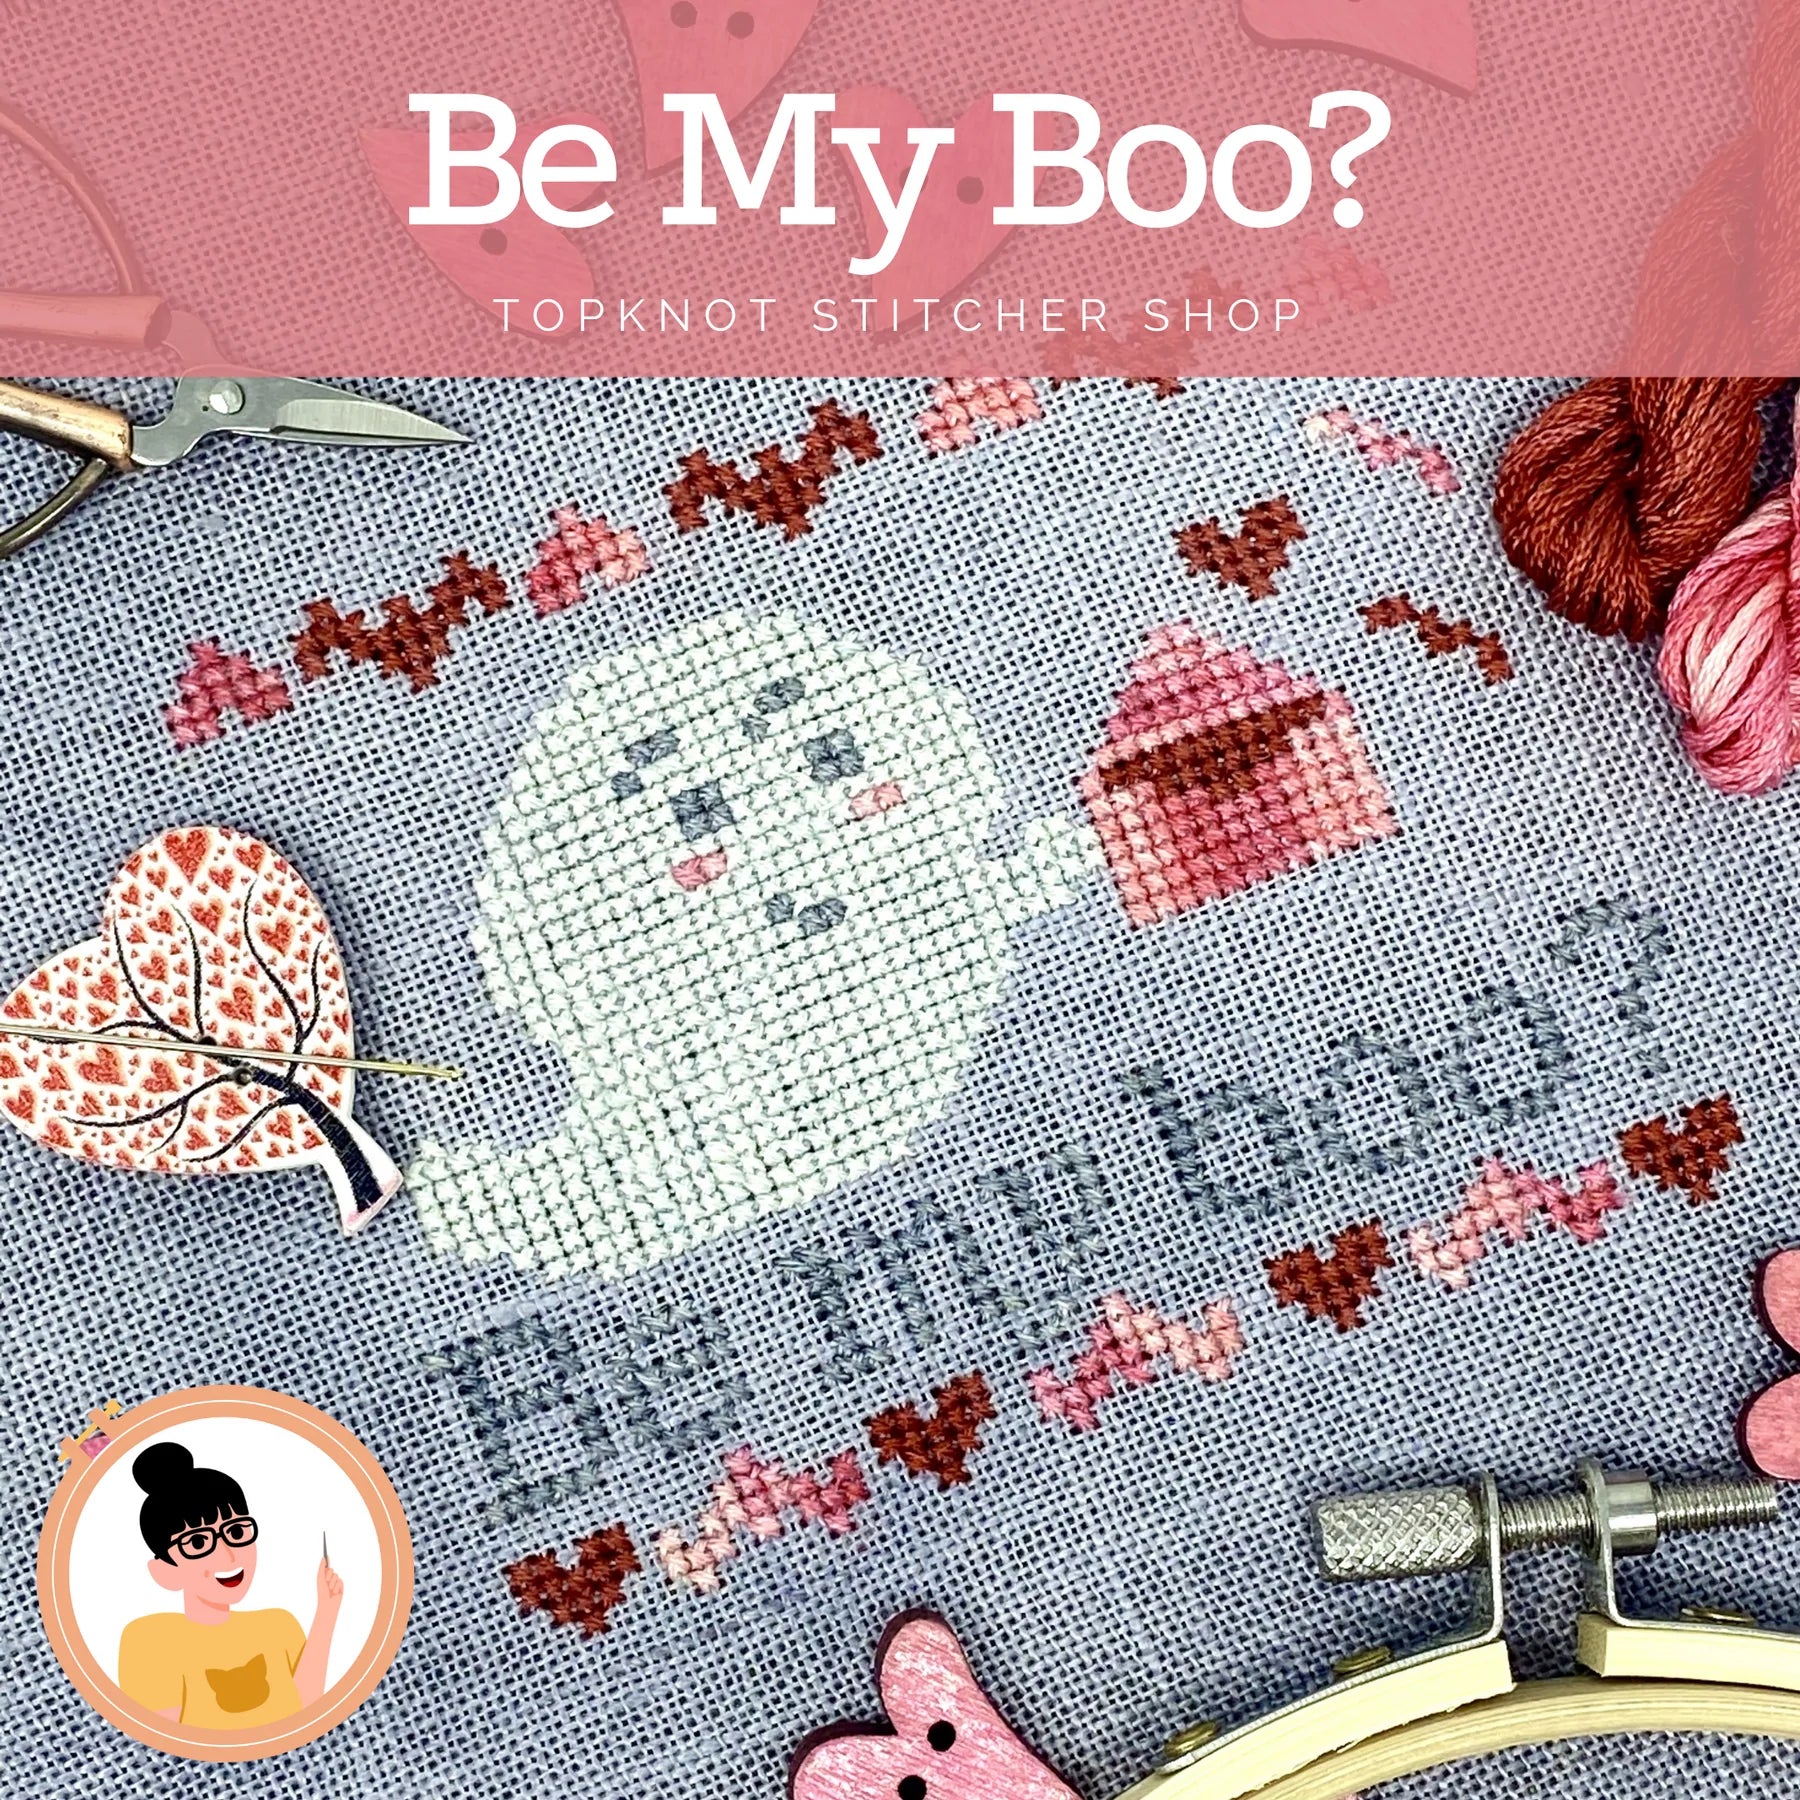 Be My Boo by Topknot Stitcher